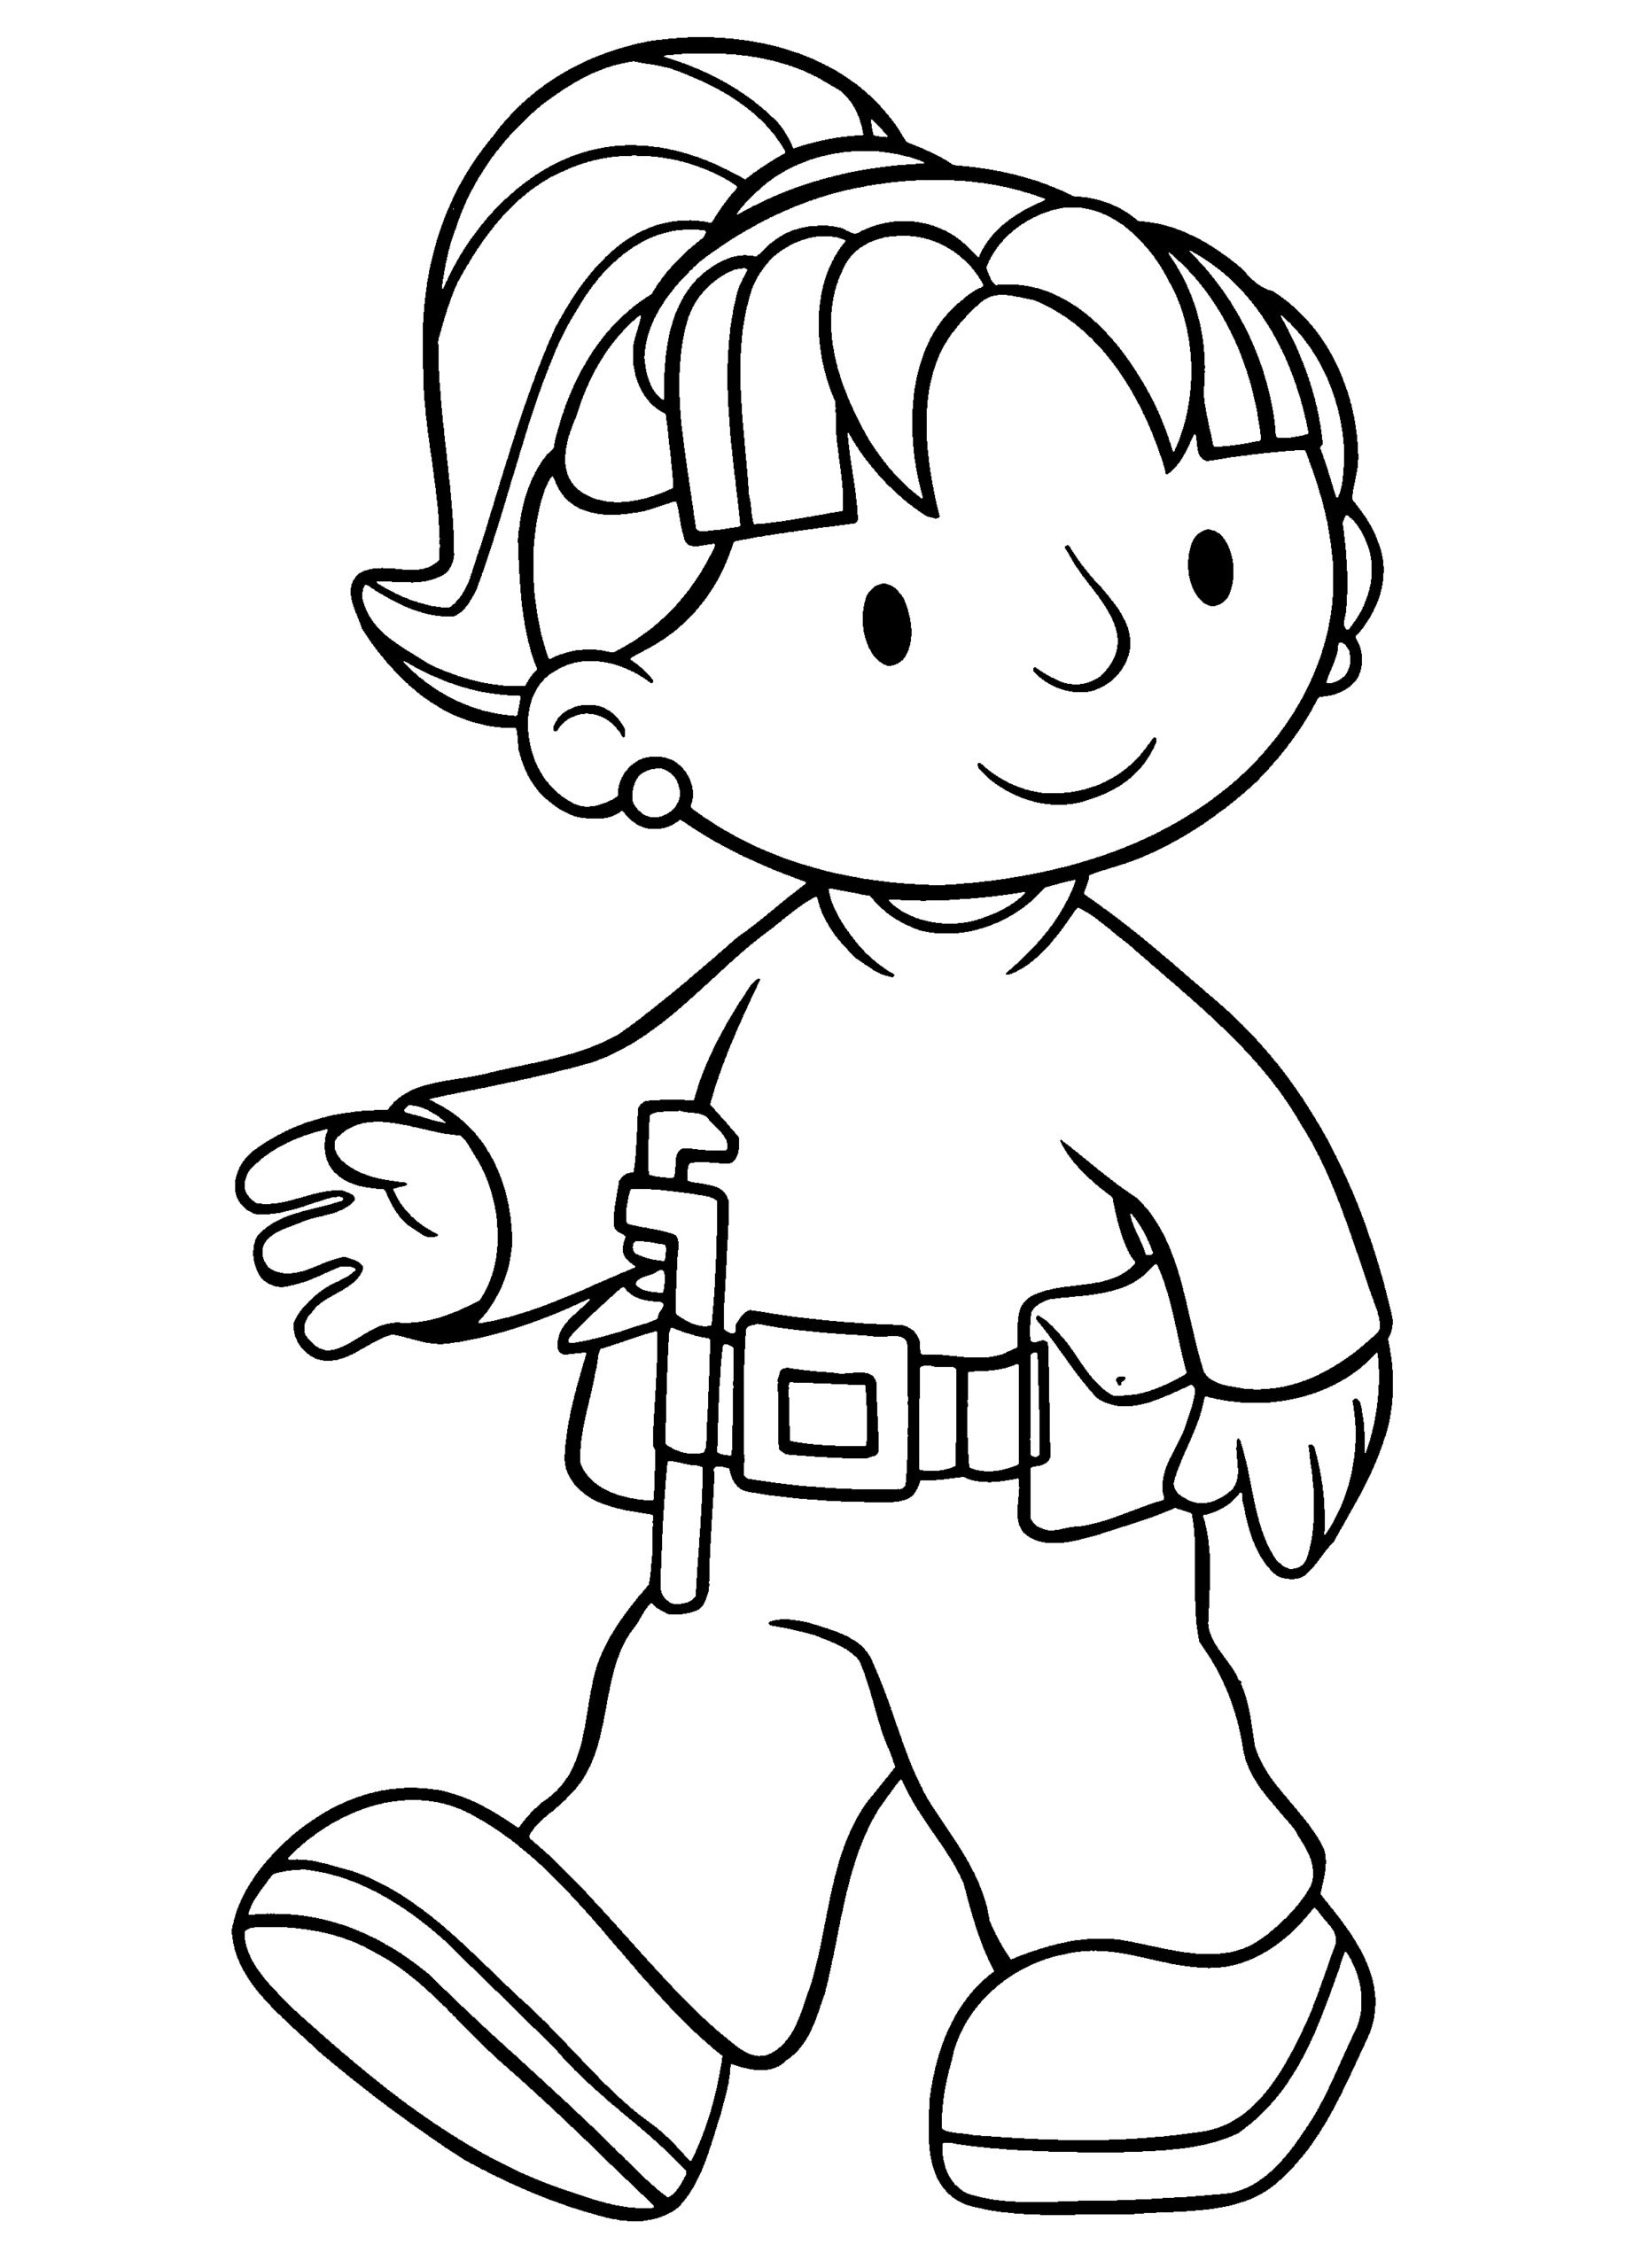 Bob the Builder Coloring Pages TV Film bob the builder 77 Printable 2020 01098 Coloring4free